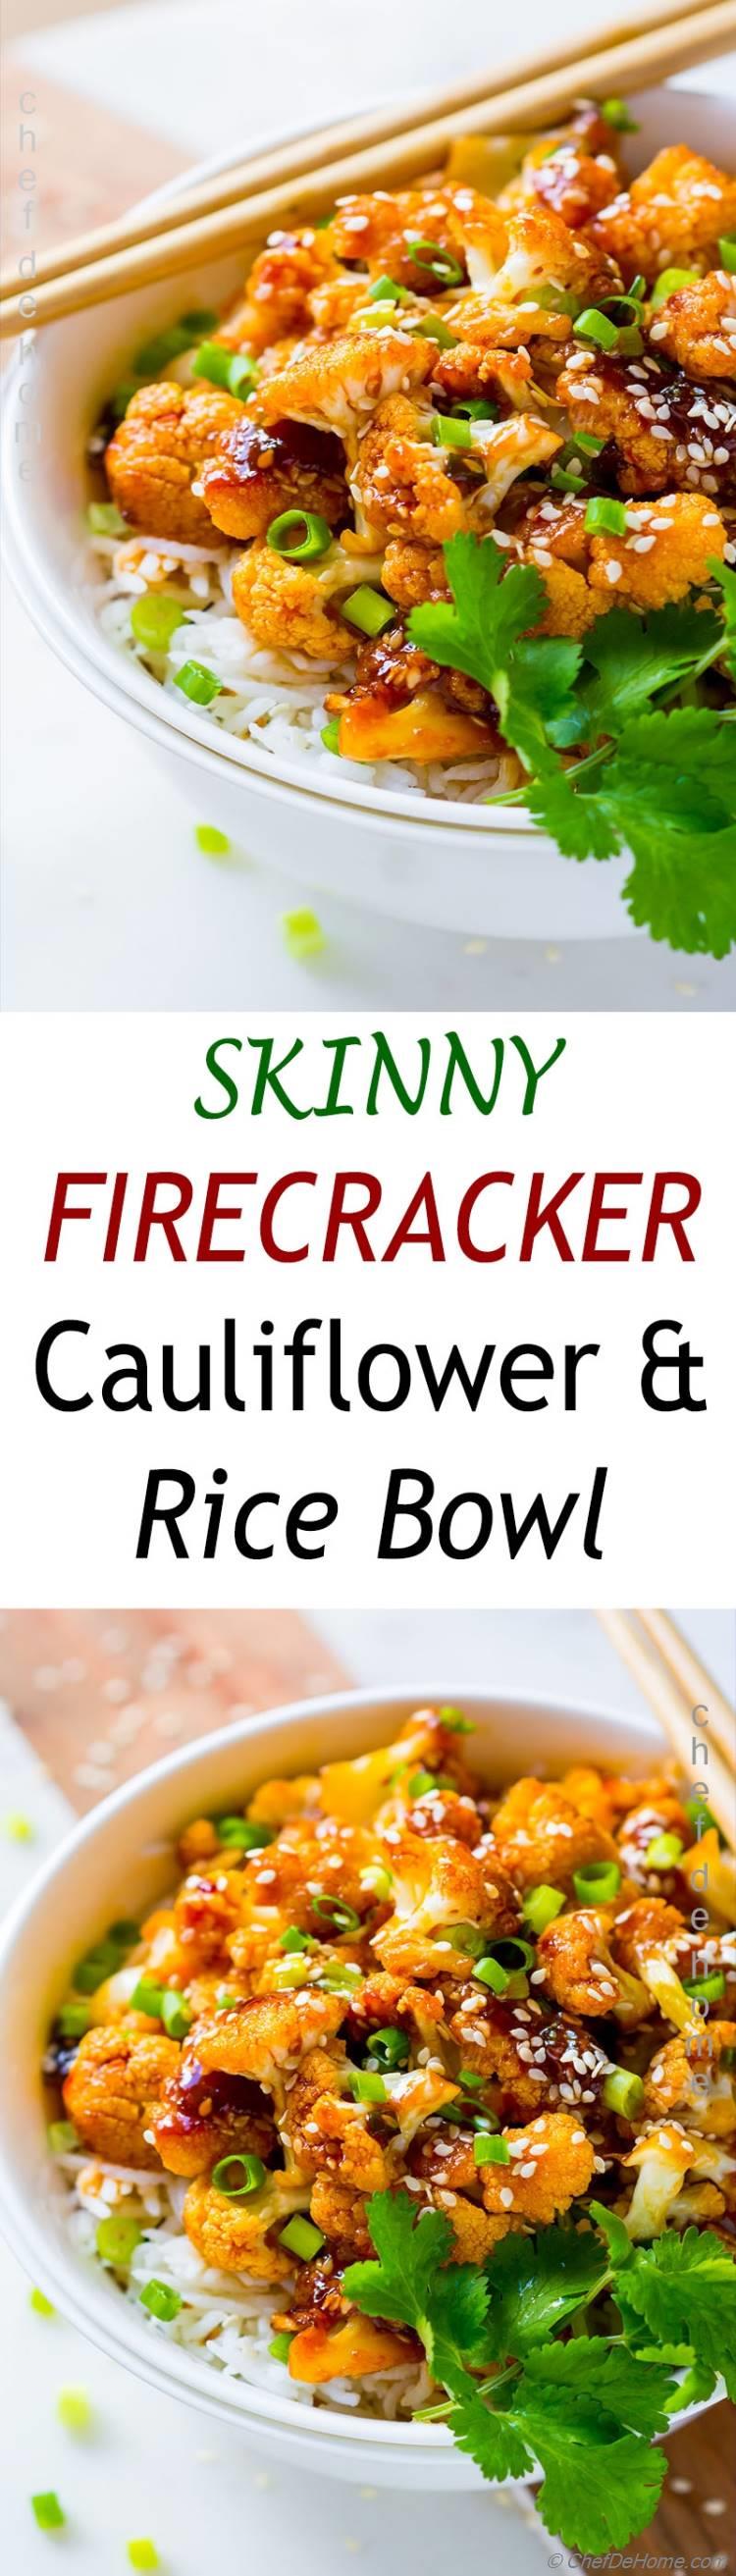 easy dinner with firecracker sauce skinny cauliflower and rice | chefdehome.com